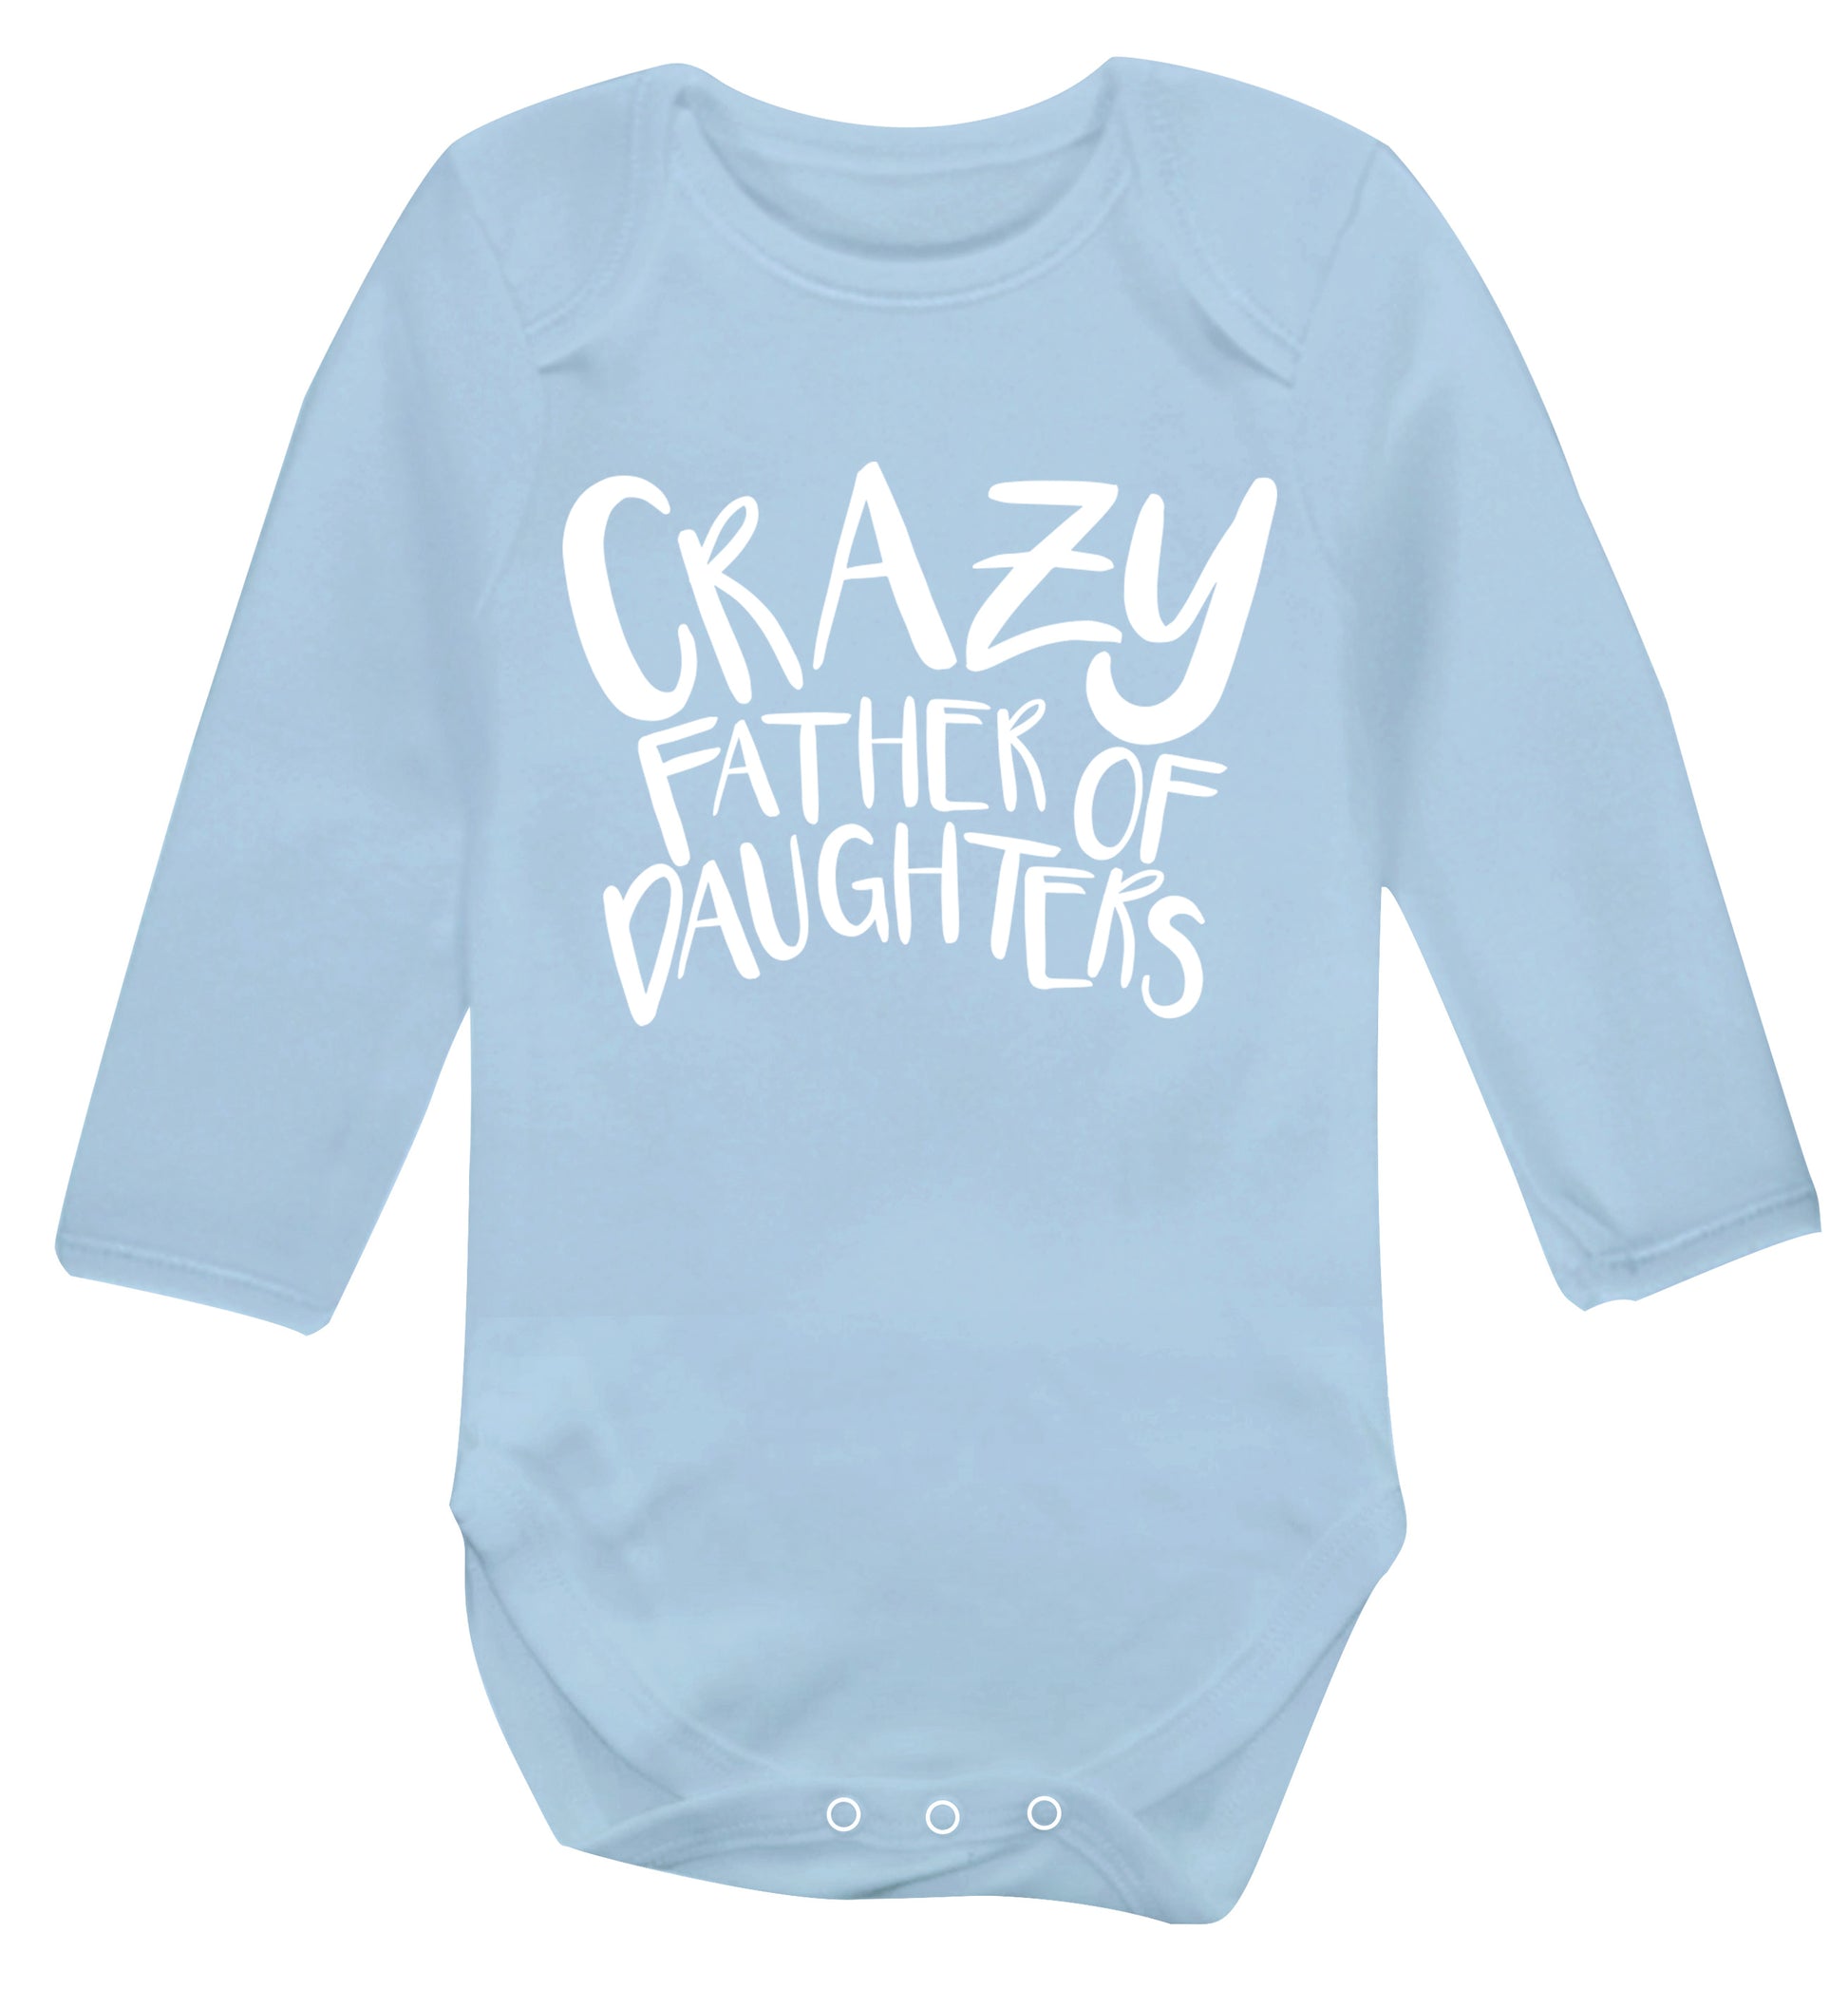 Crazy father of daughters Baby Vest long sleeved pale blue 6-12 months